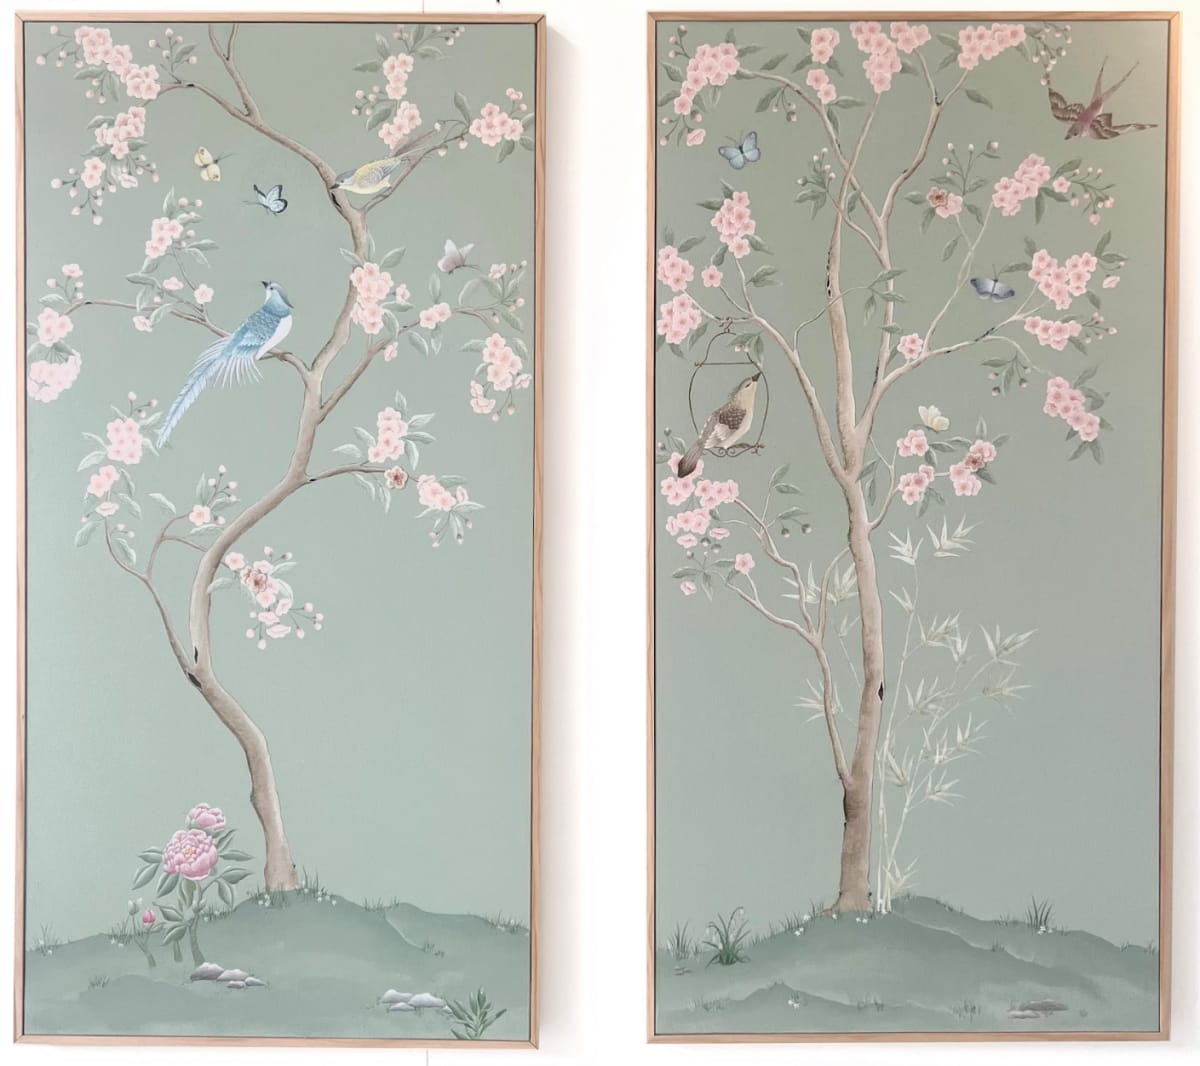 Two Blossoms (diptych) by Jolie Hutchings 